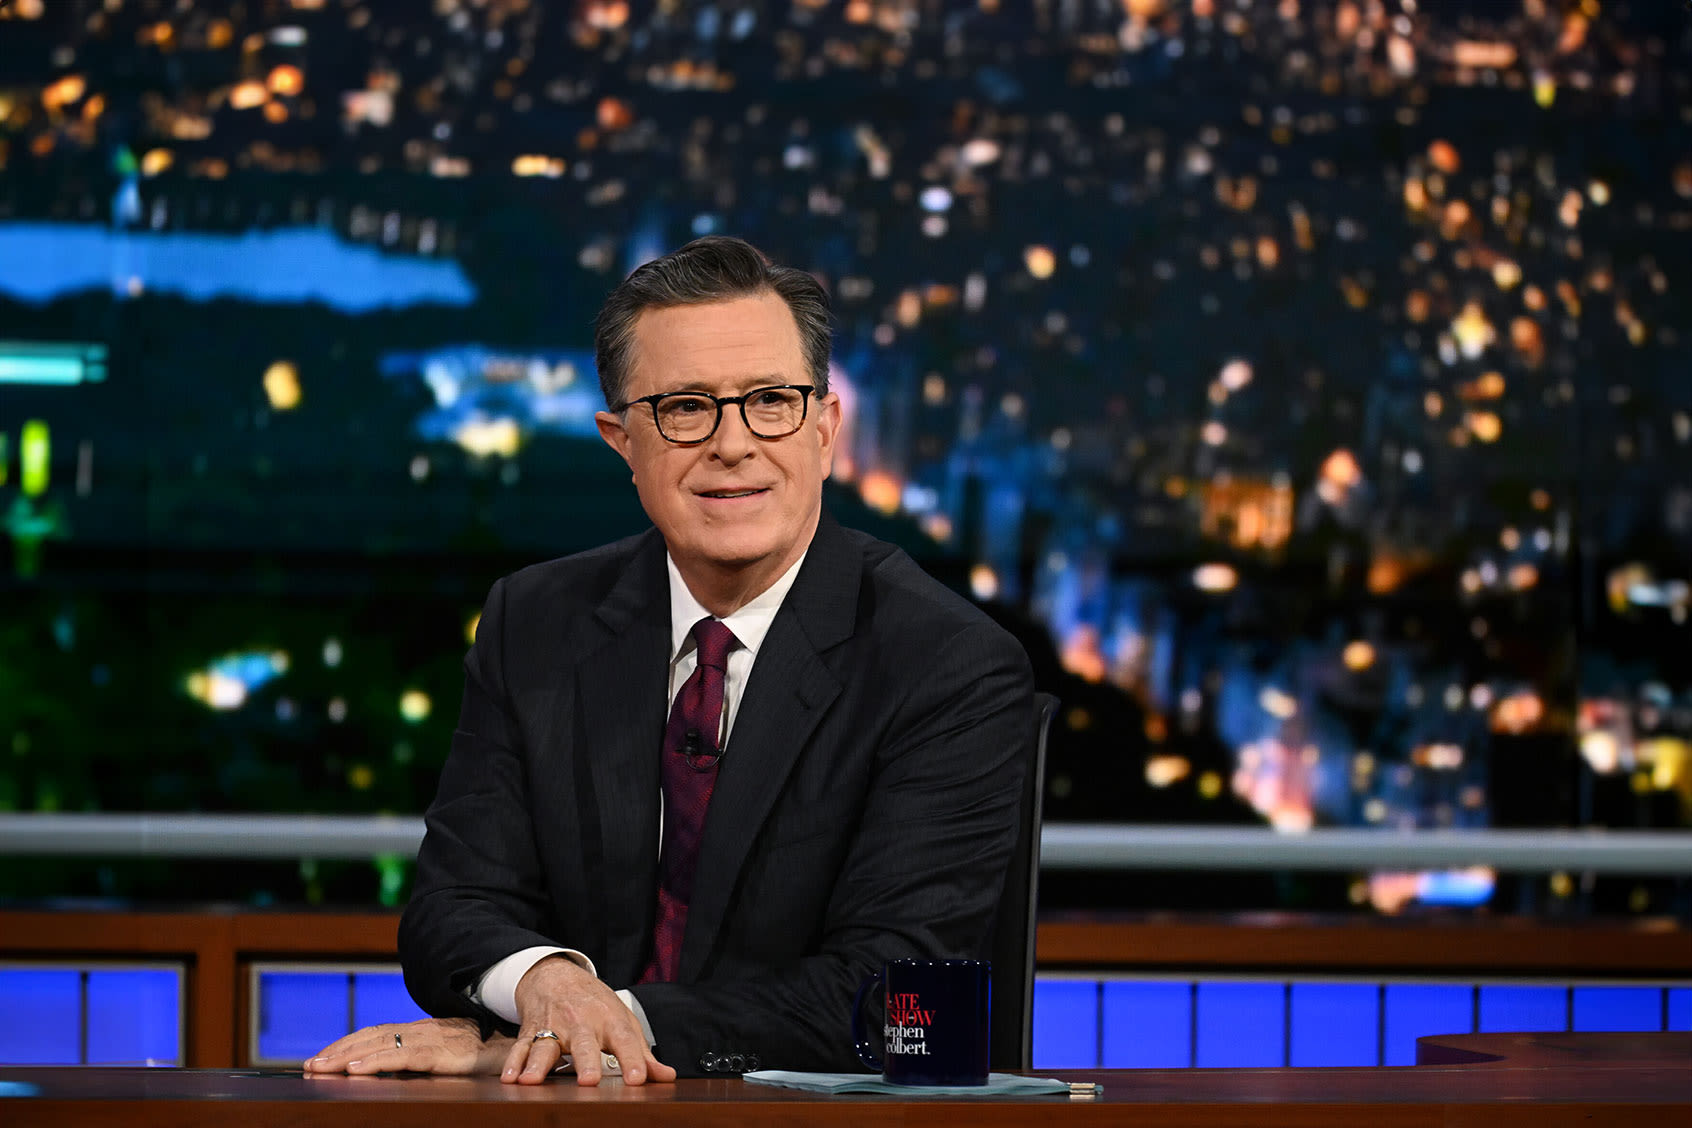 Stephen Colbert believes Biden can put "needs of the country ahead of the needs of his ego"